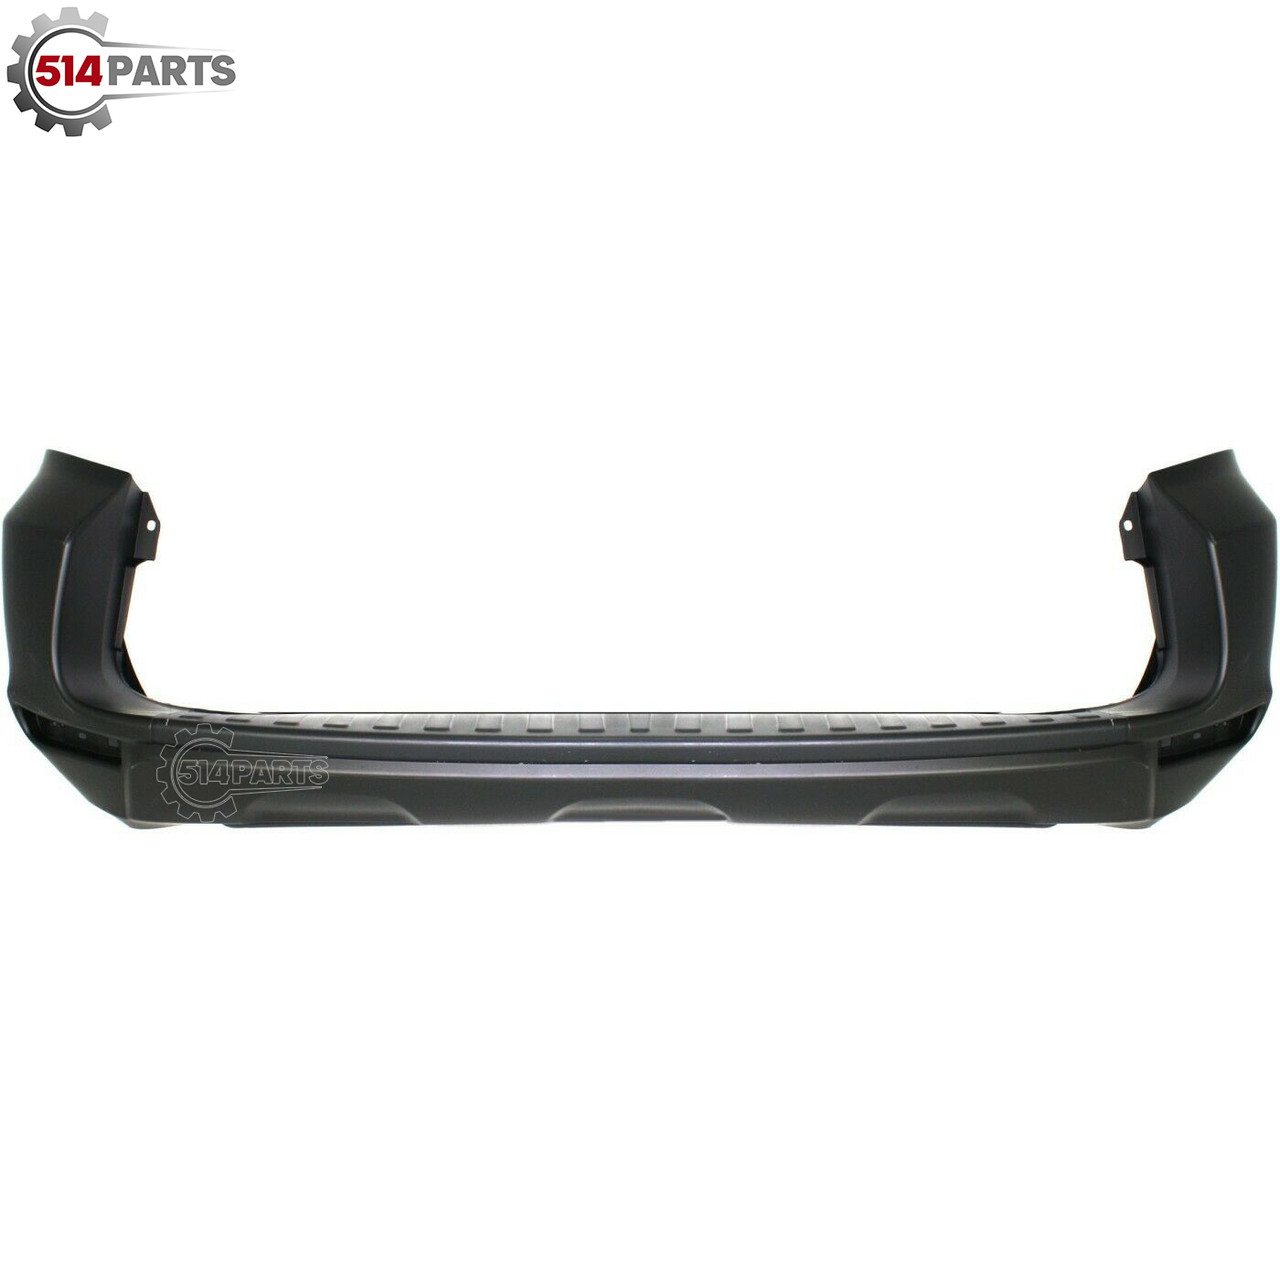 2009 - 2012 TOYOTA RAV4 without FLARE HOLE PRIMED REAR BUMPER COVER with RR GATE MOUNTED SPARE TIRE - PARE-CHOC ARRIER PRIME